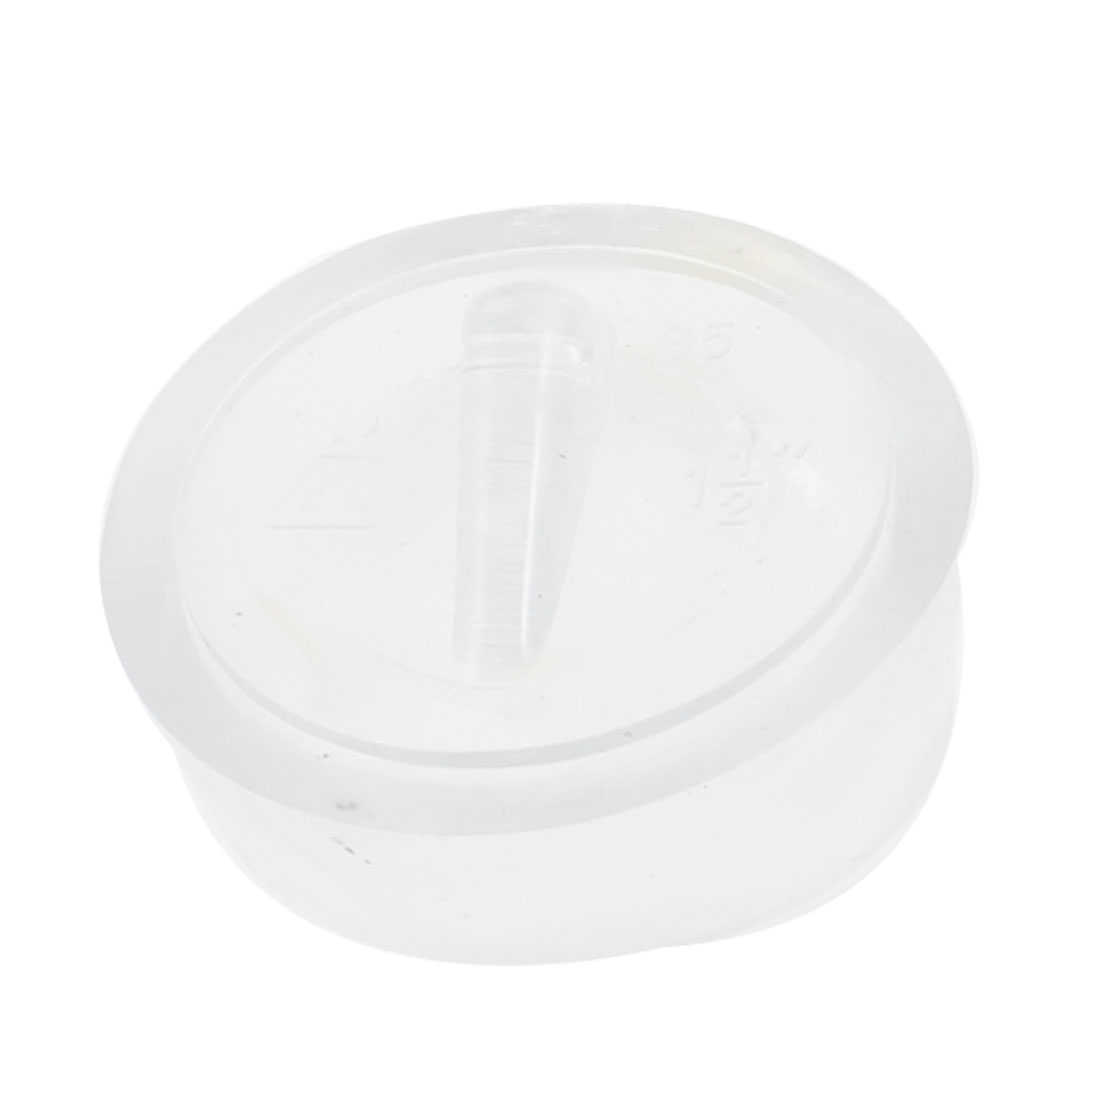 33mm Dia Clear Blue Rubber Sink Plug Garbage Disposal Stopper